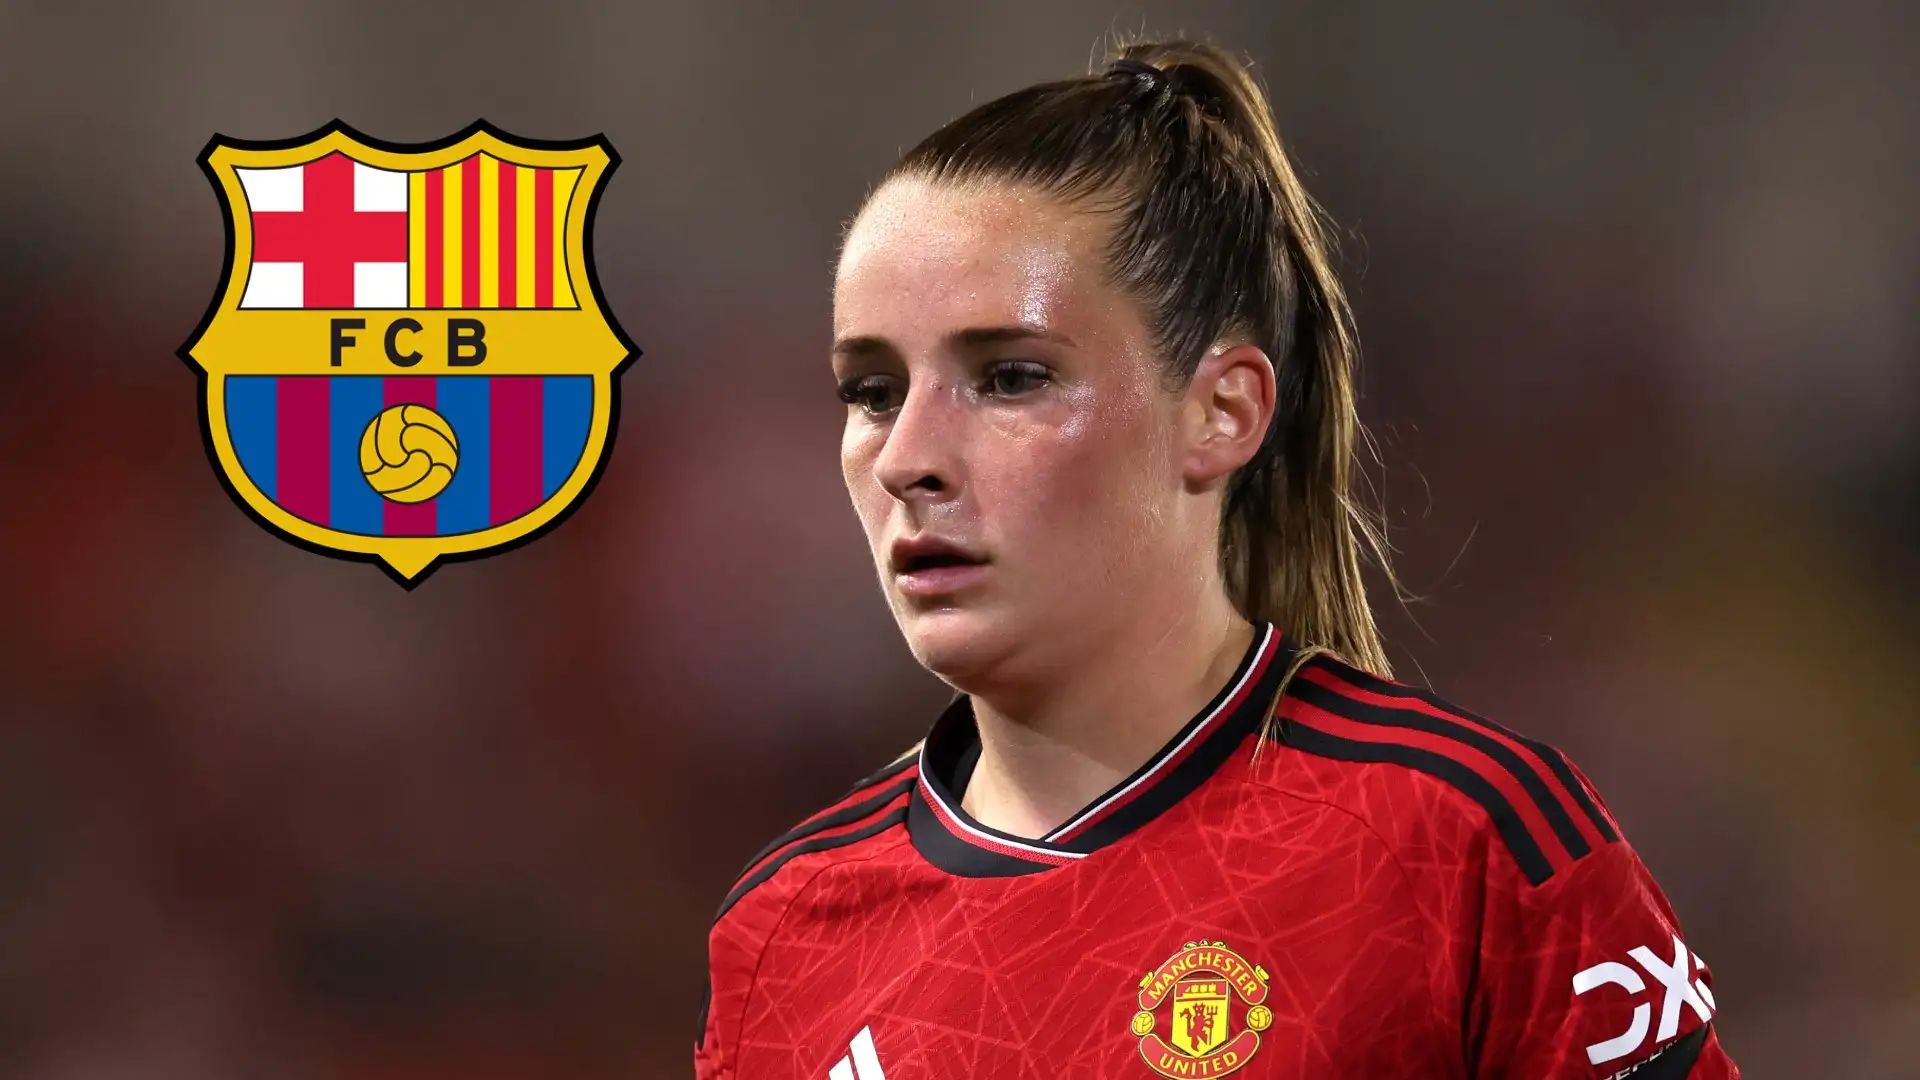 Another Lioness in Barcelona?! England star Ella Toone attracting interest from European champions - but bumper fee would be needed to sign her from Man Utd